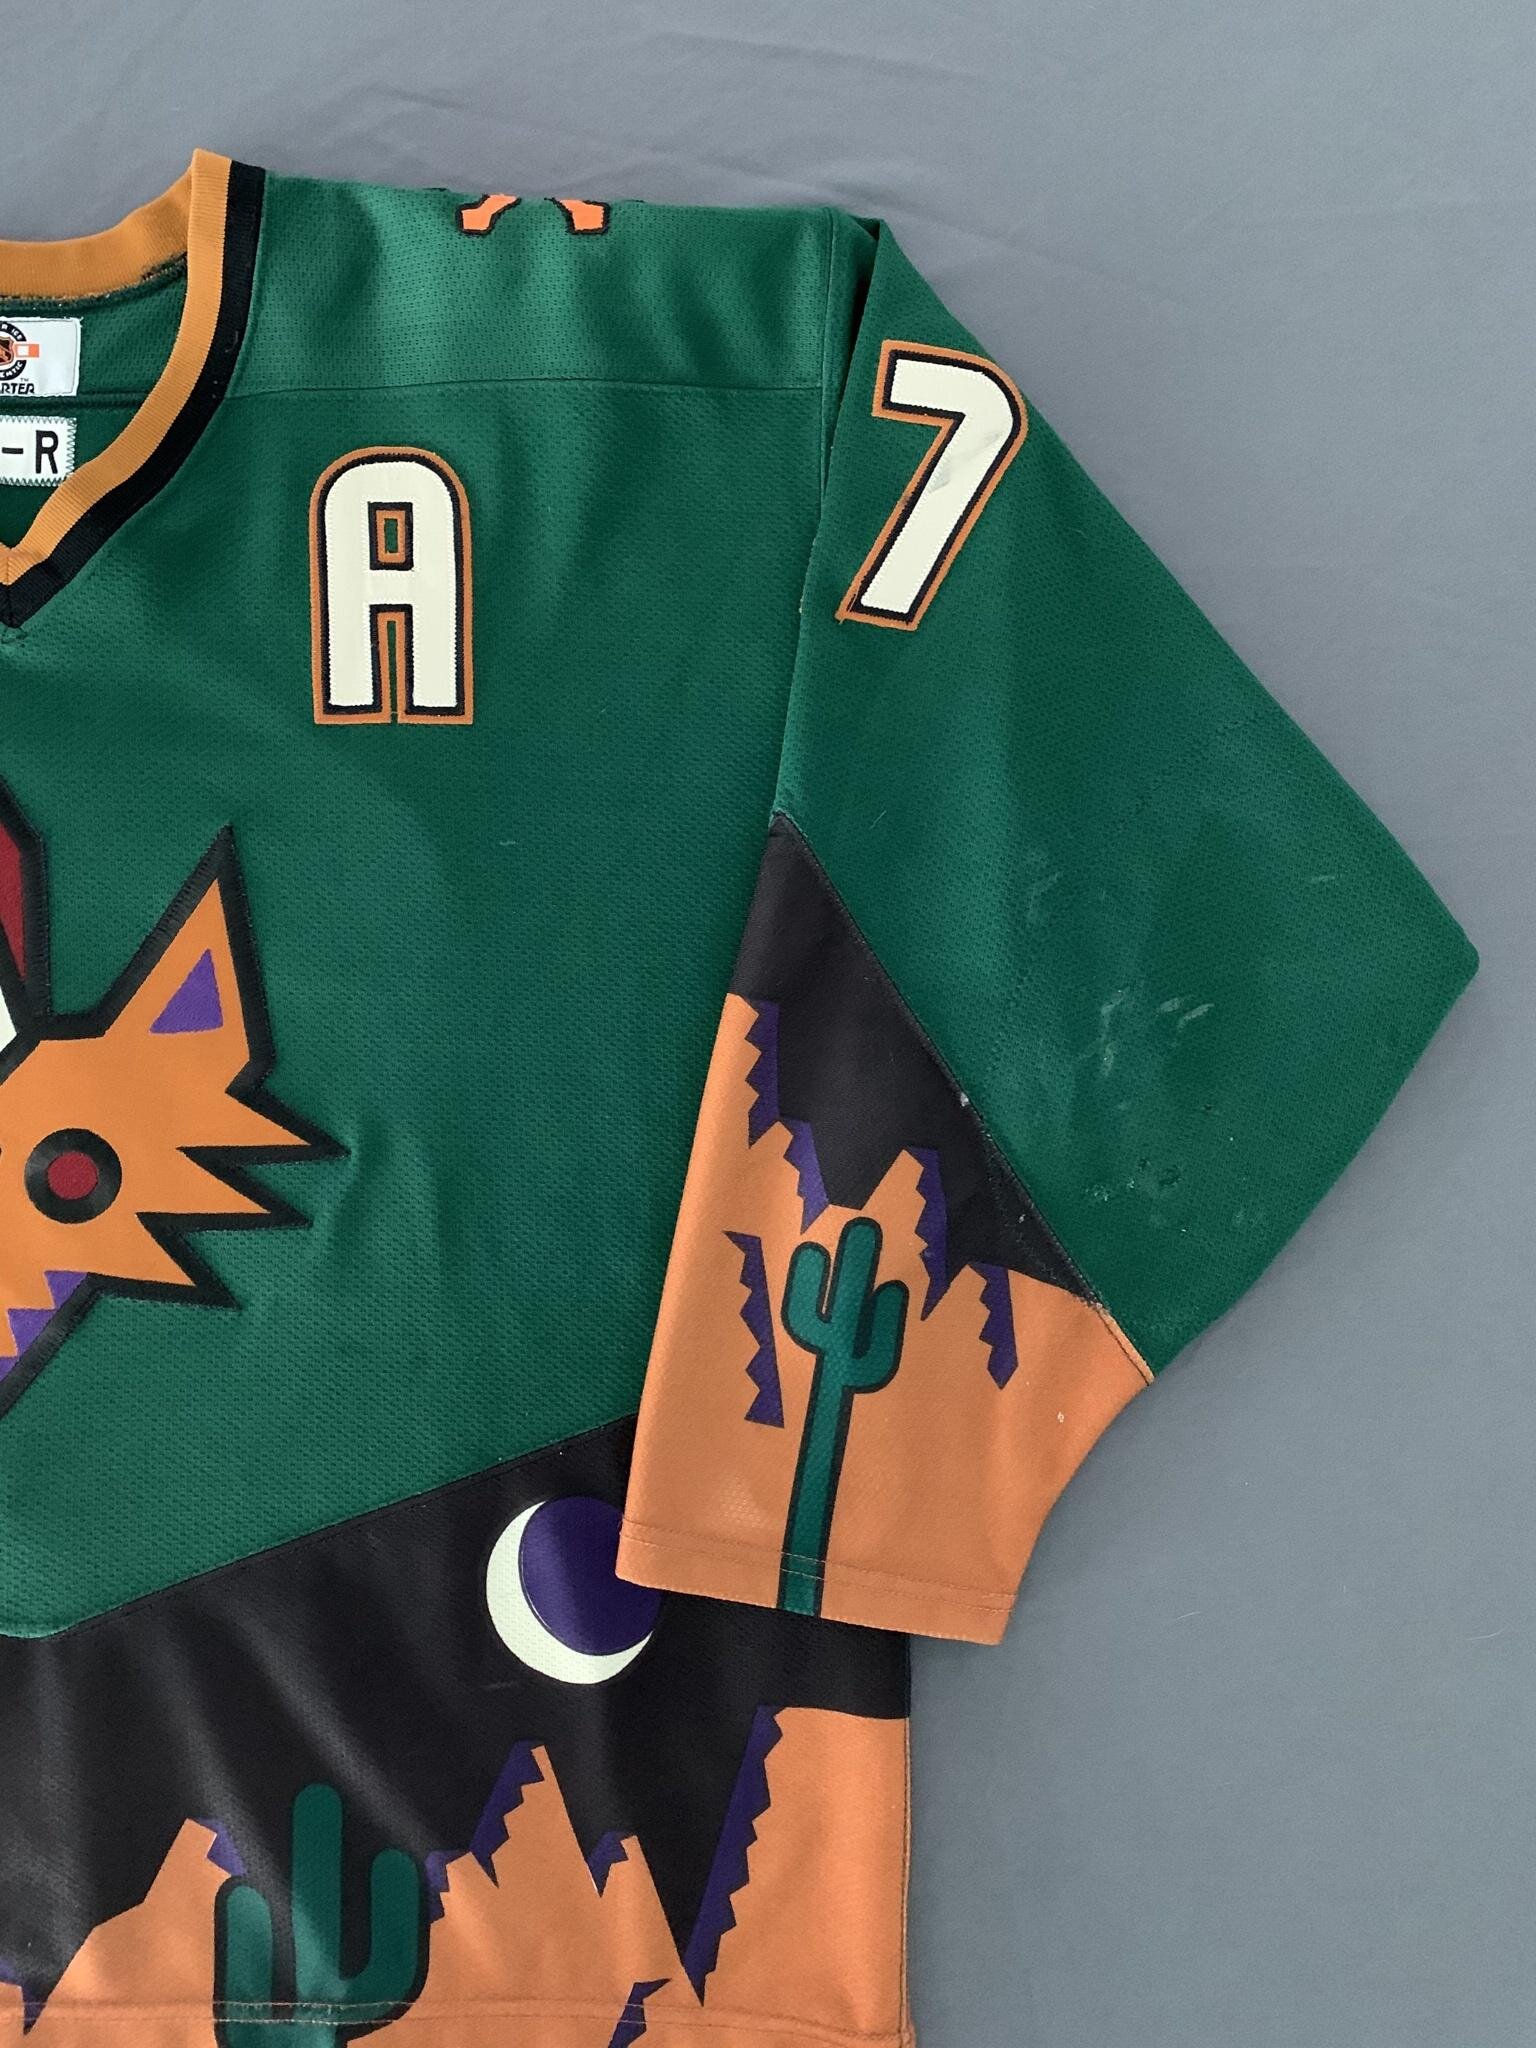 First picture of the new Alt jersey is out : r/Coyotes